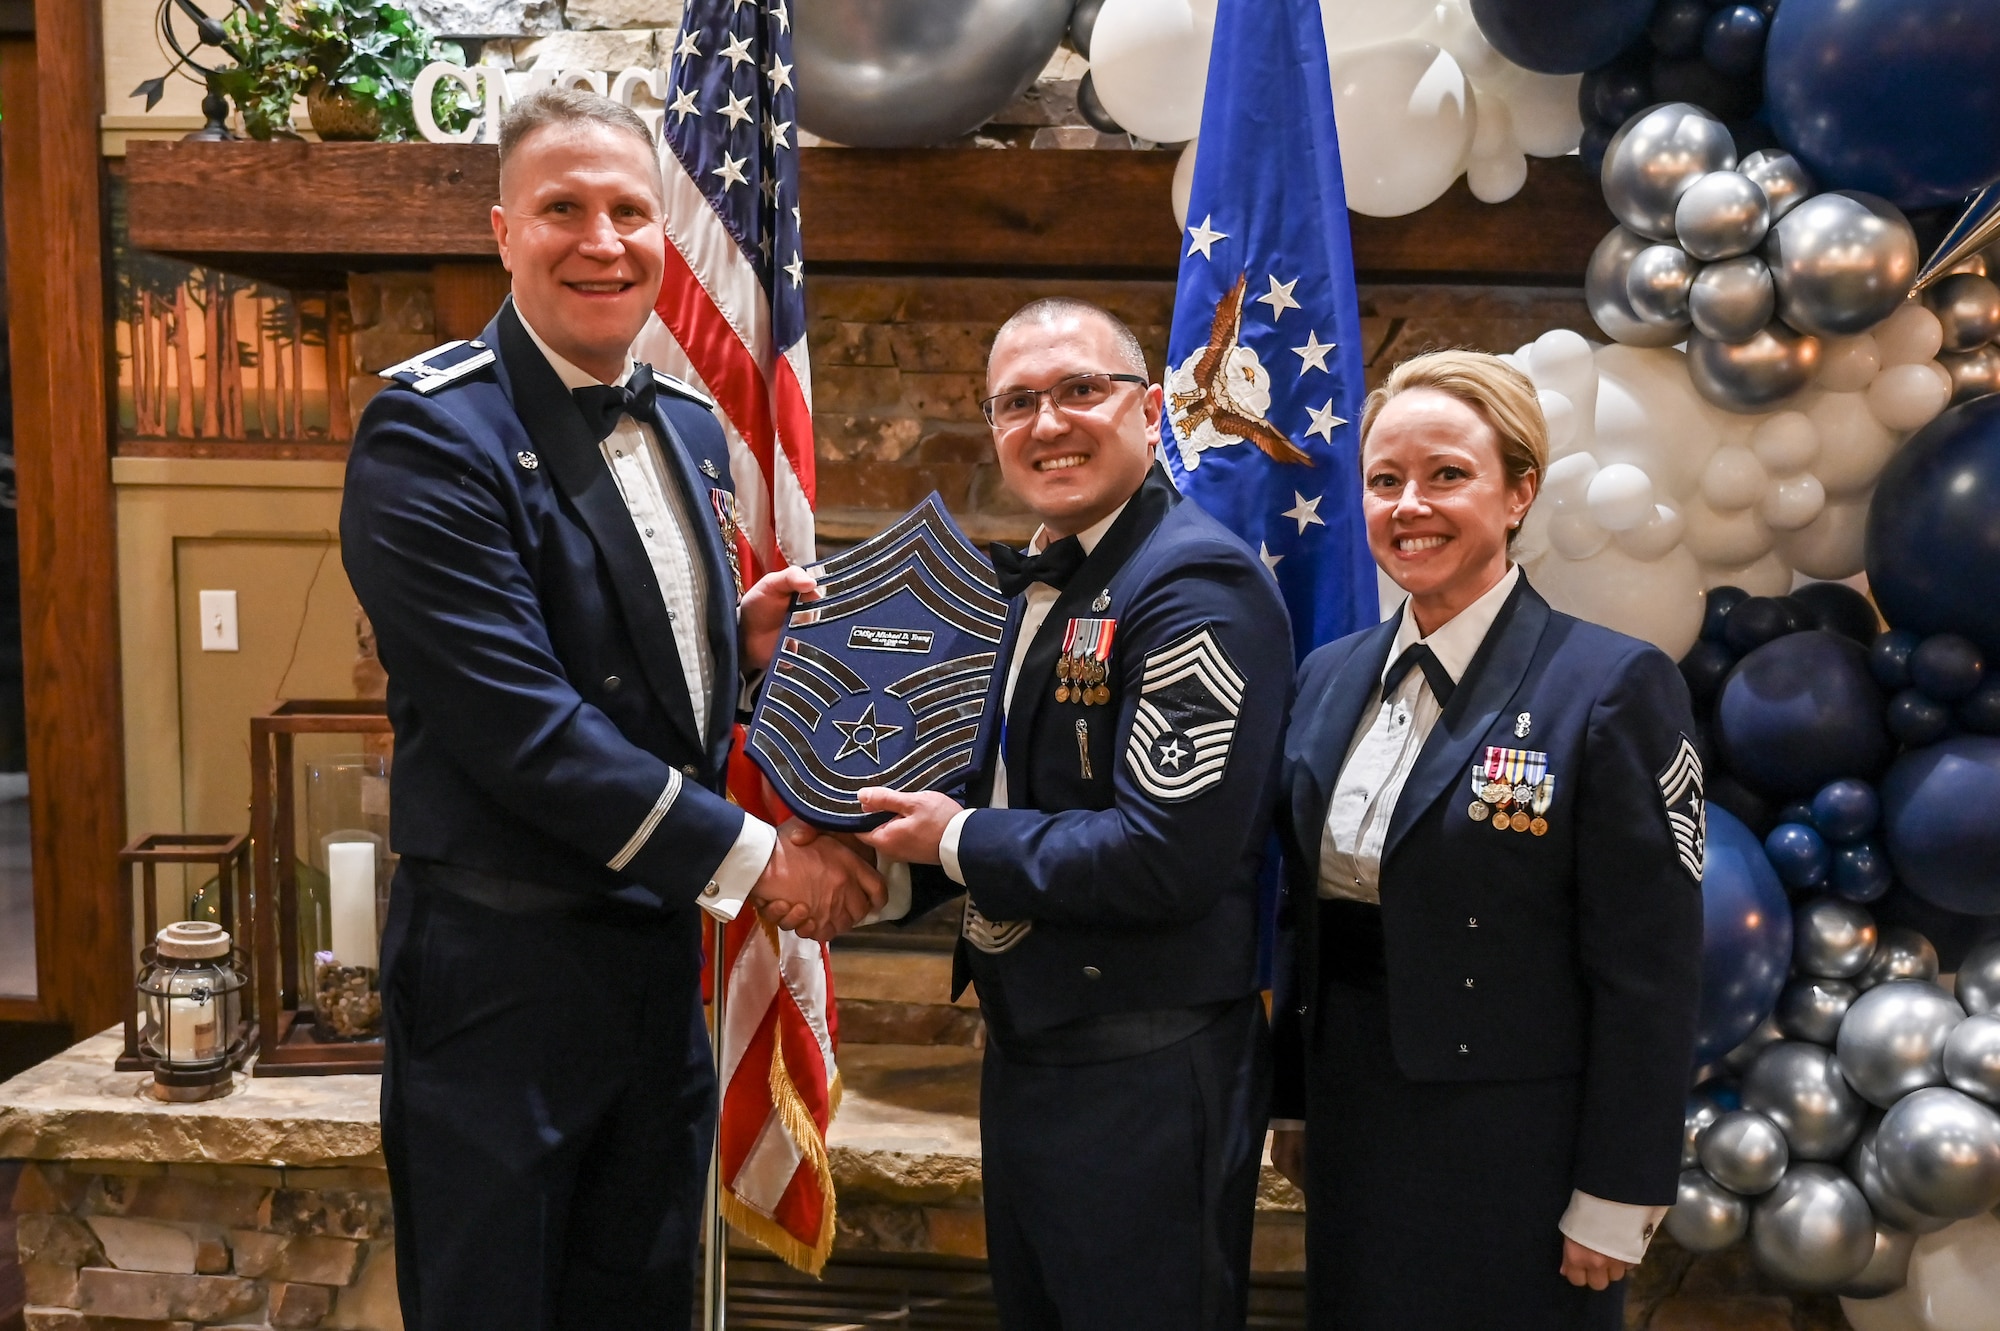 Chief Master Sgt. Michael Young (center), 419th Maintenance Group, poses with Col. Matthew Fritz (left), 419th Fighter Wing commander, and Chief Master Sgt. Heather Richins, 419th Fighter Wing command chief